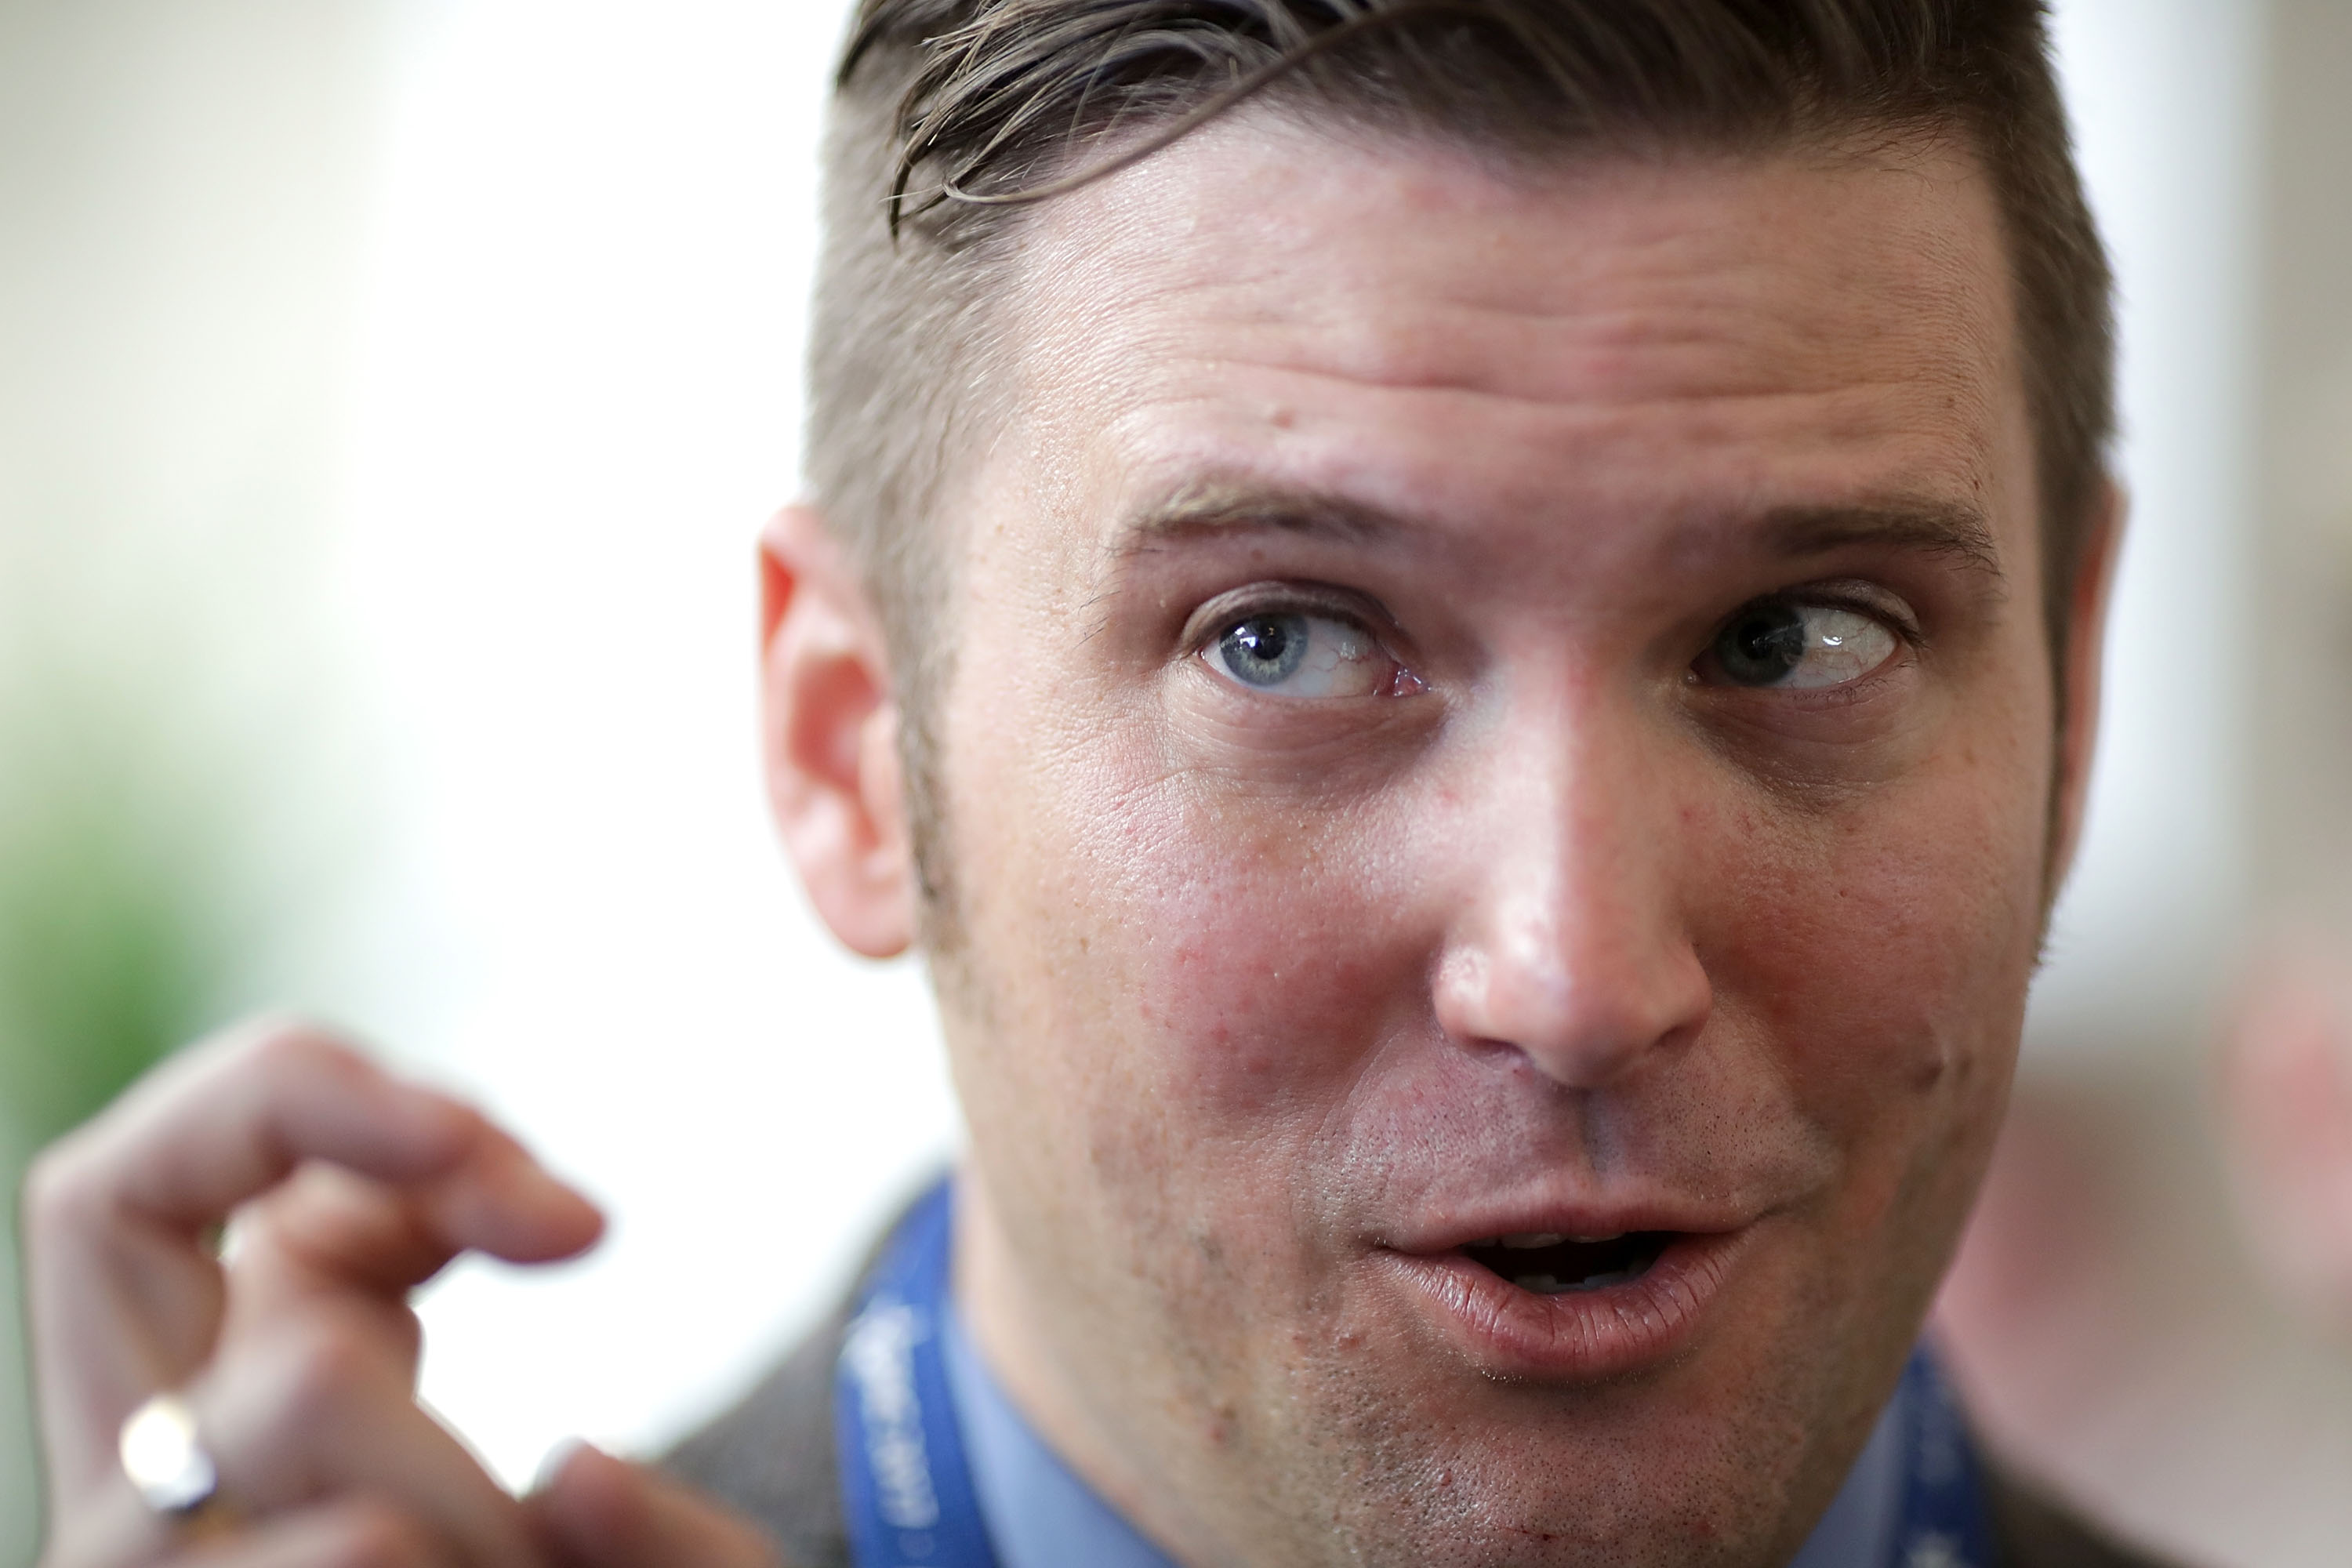 White nationalist Richard Spencer talks with reporters during the first day of the Conservative Political Action Conference at the Gaylord National Resort and Convention Center on Feb. 23, 2017 in National Harbor, Maryland. (Chip Somodevilla/Getty Images)